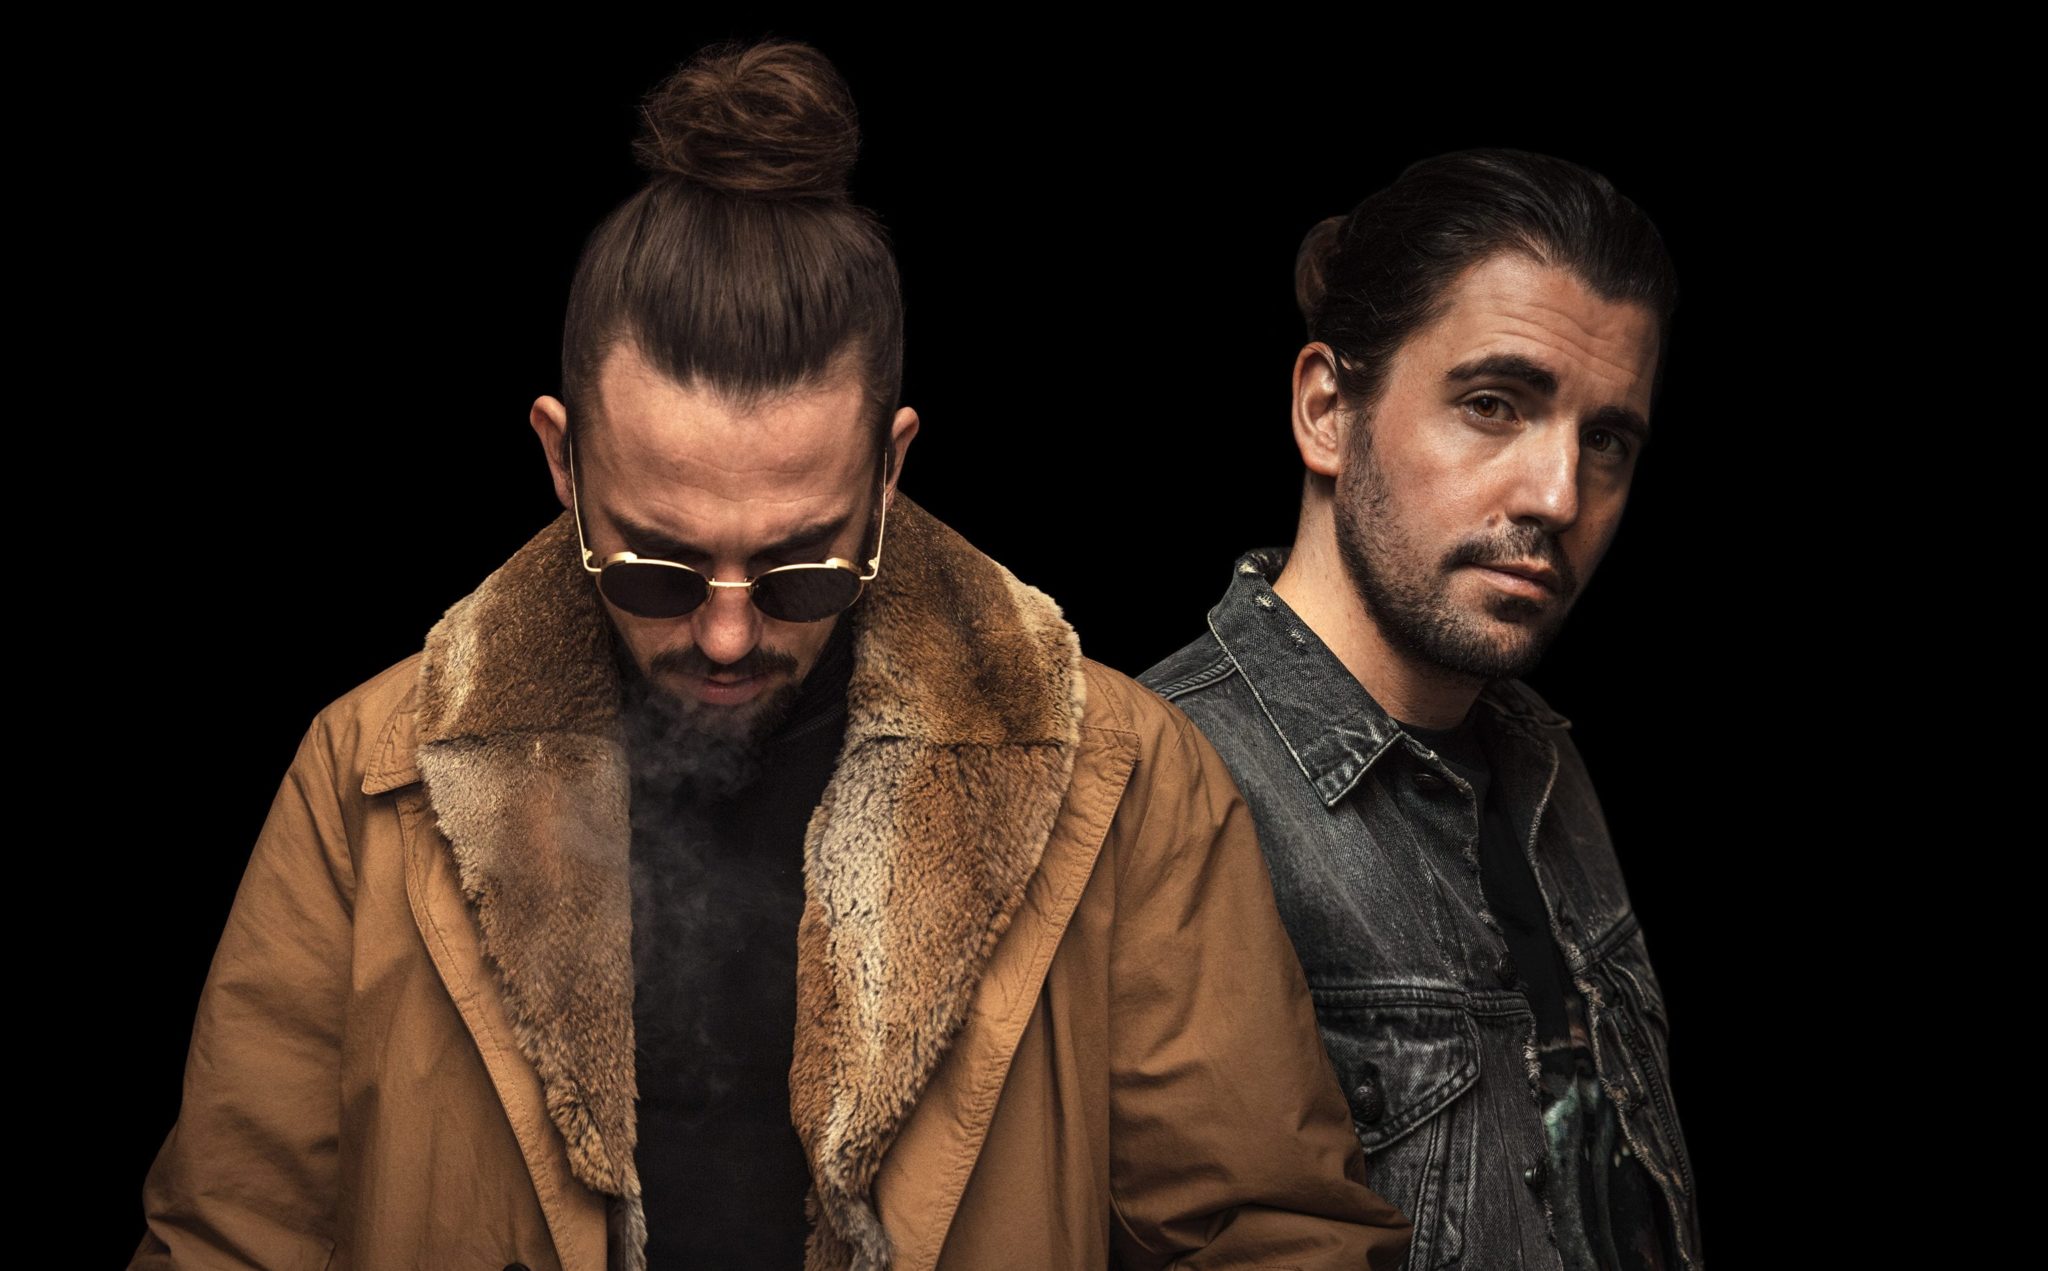 DIMITRI VEGAS & LIKE MIKE AND TOMORROWLAND RELEASE FULL LIVE SET FROM THEIR WINTER EDITION OF ‘GARDEN OF MADNESS’